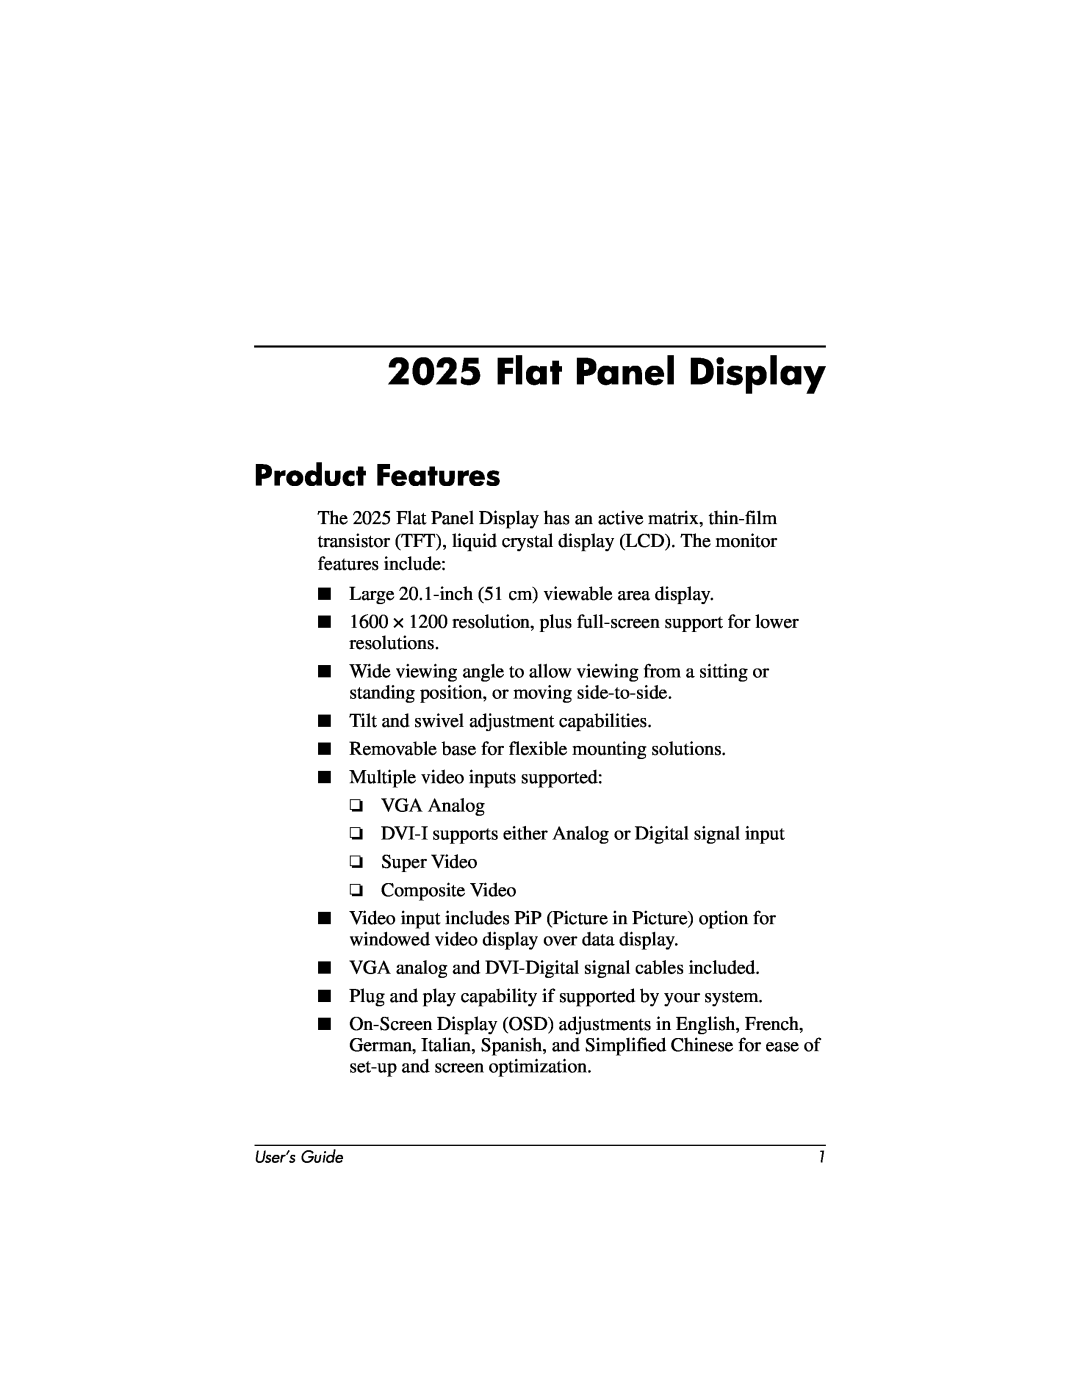 Compaq 2025 manual Flat Panel Display, Product Features 